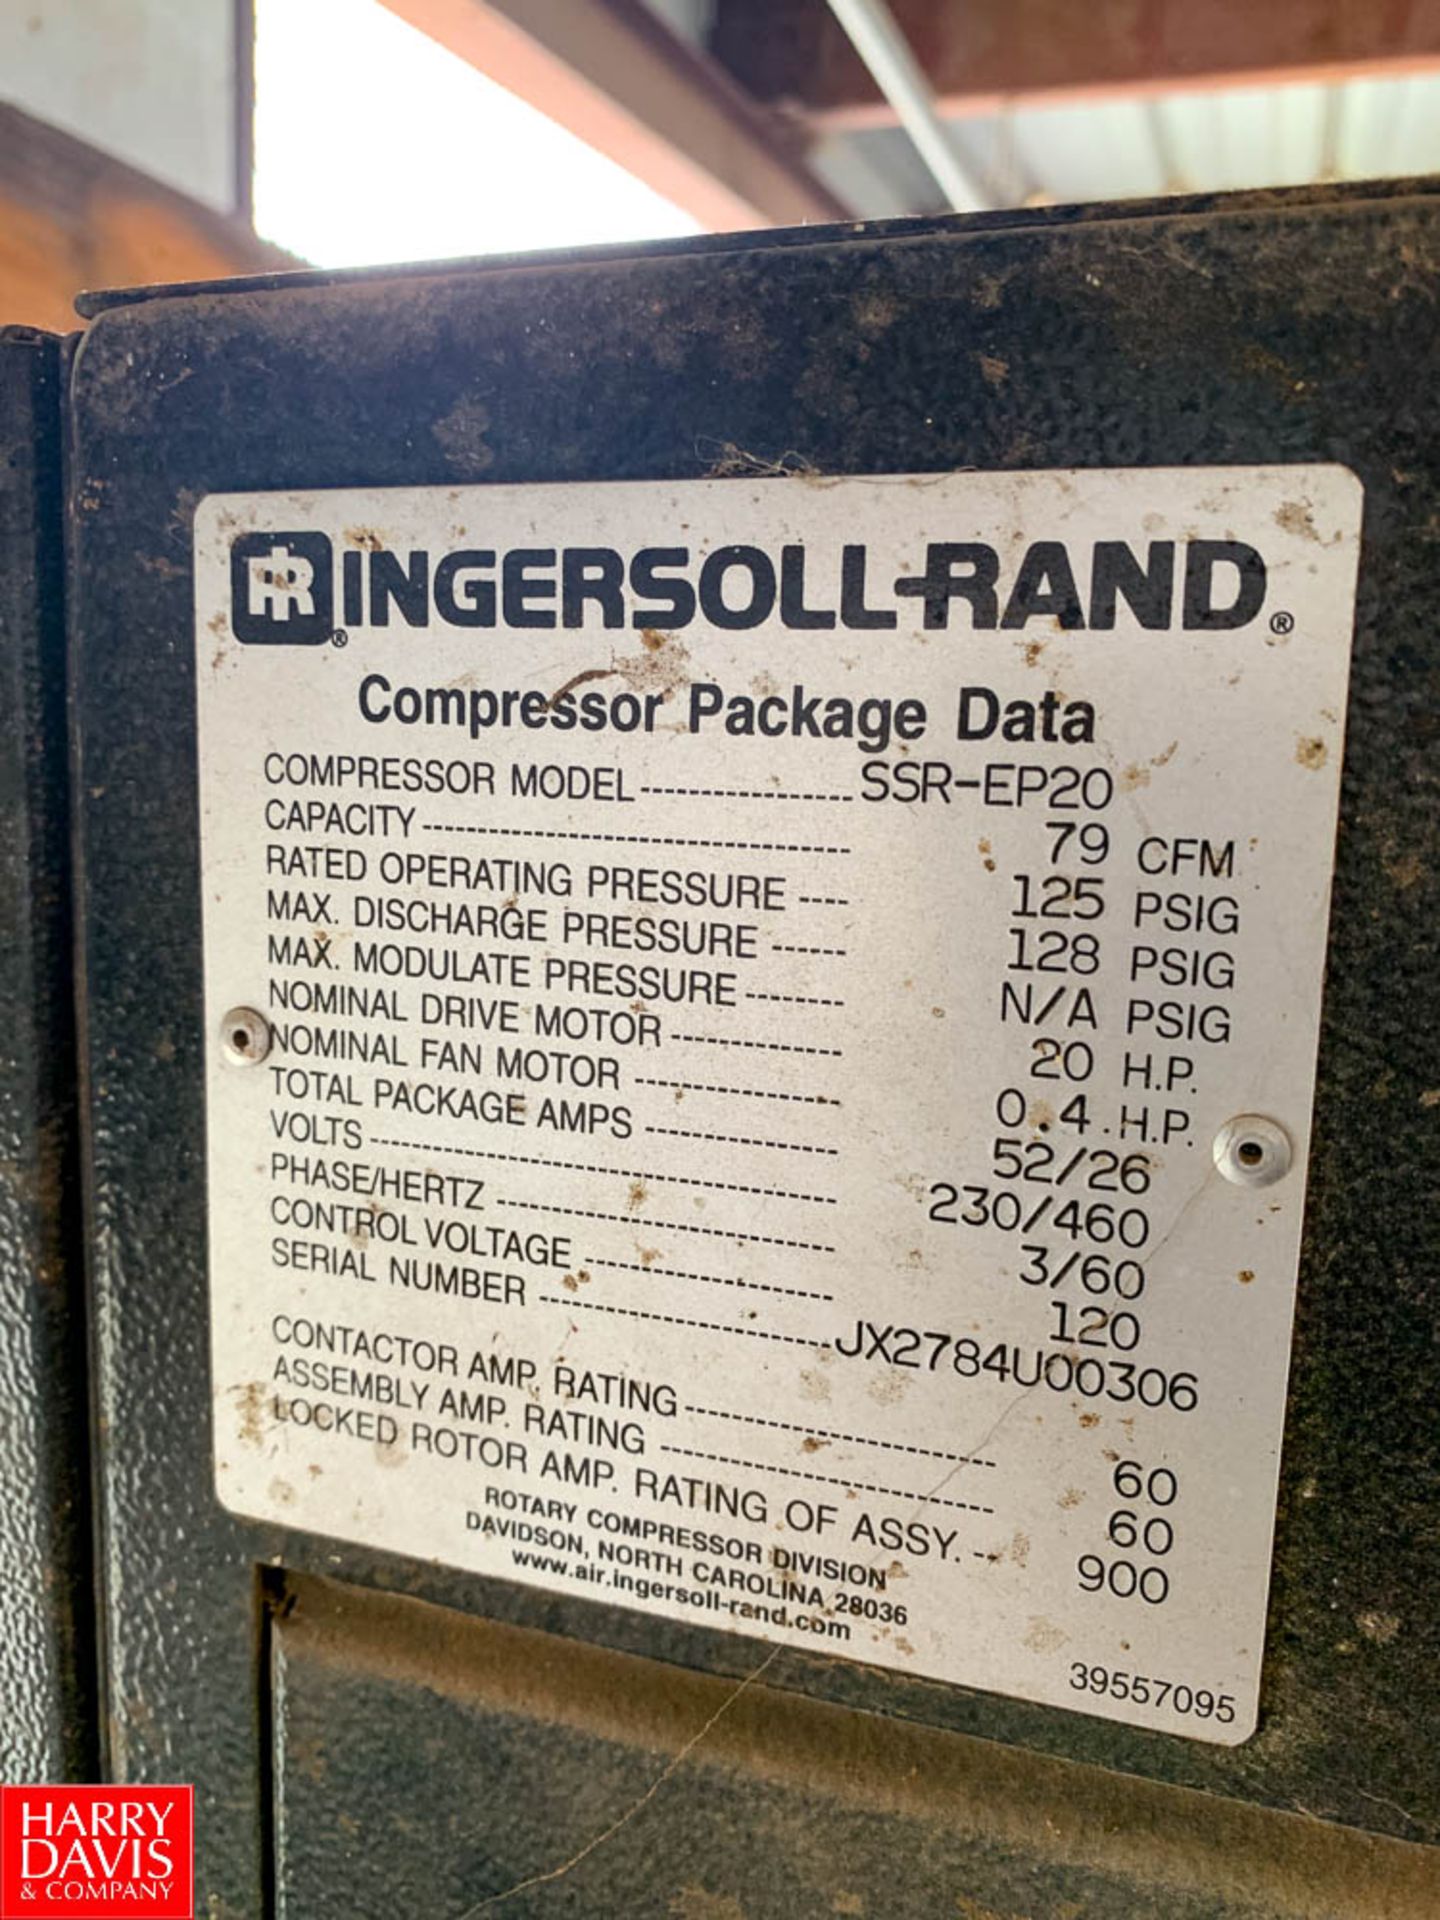 Ingersoll Rand 20 HP Air Compressor Model SSR-EP20 - Image 2 of 2